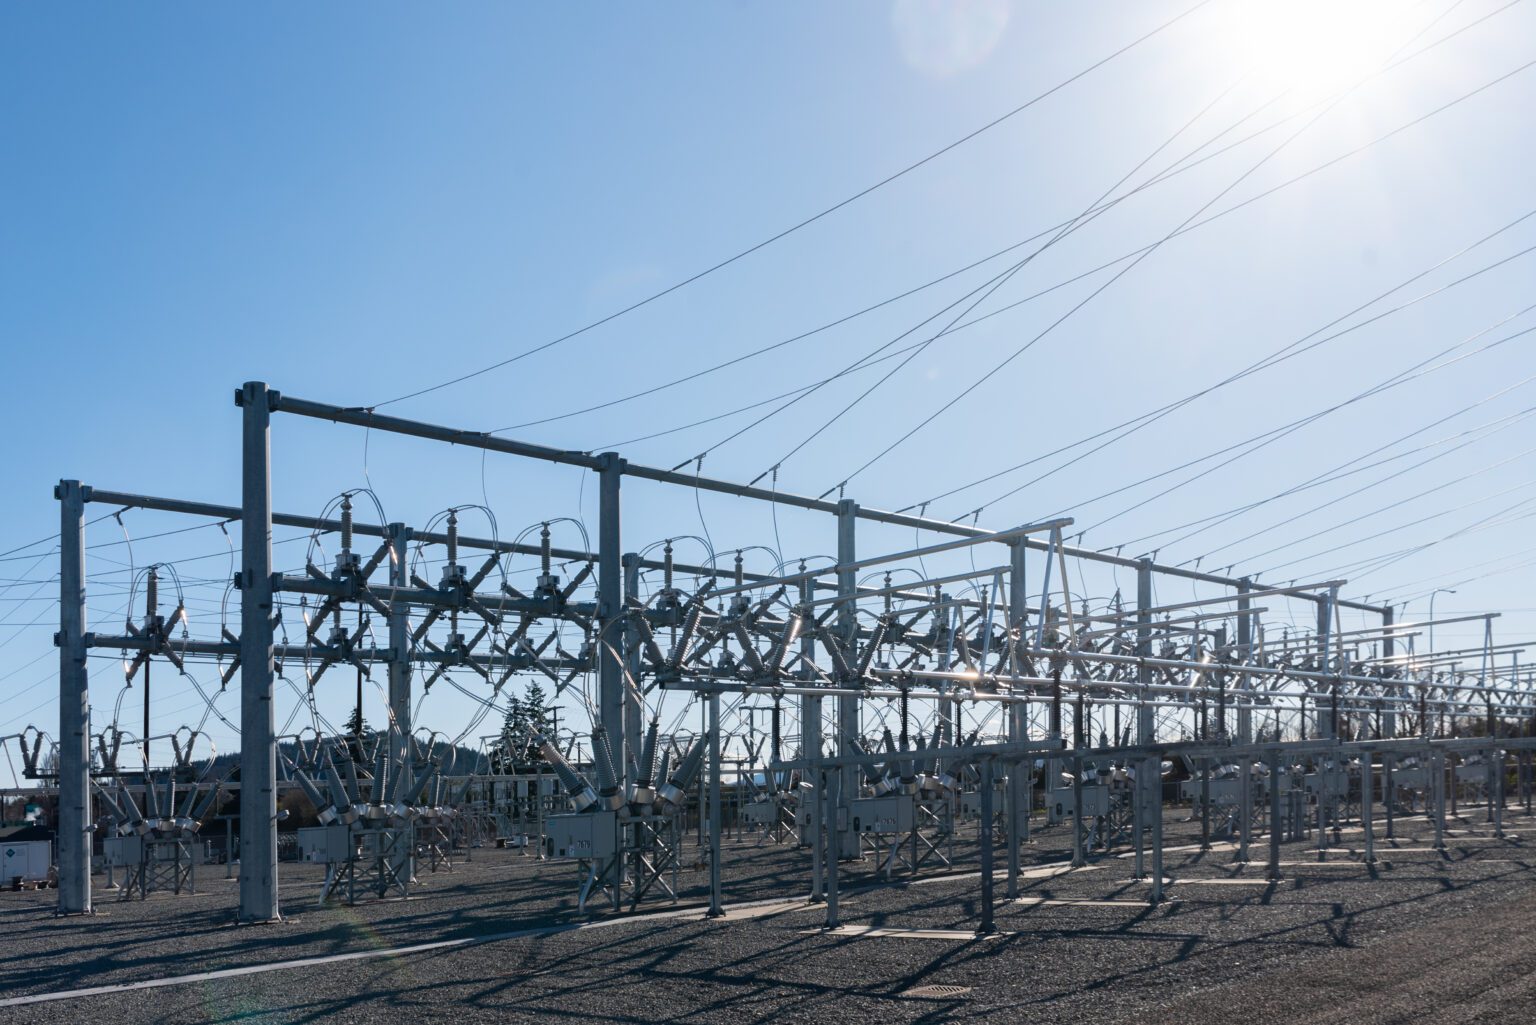 Current demand on the regional power grid is growing